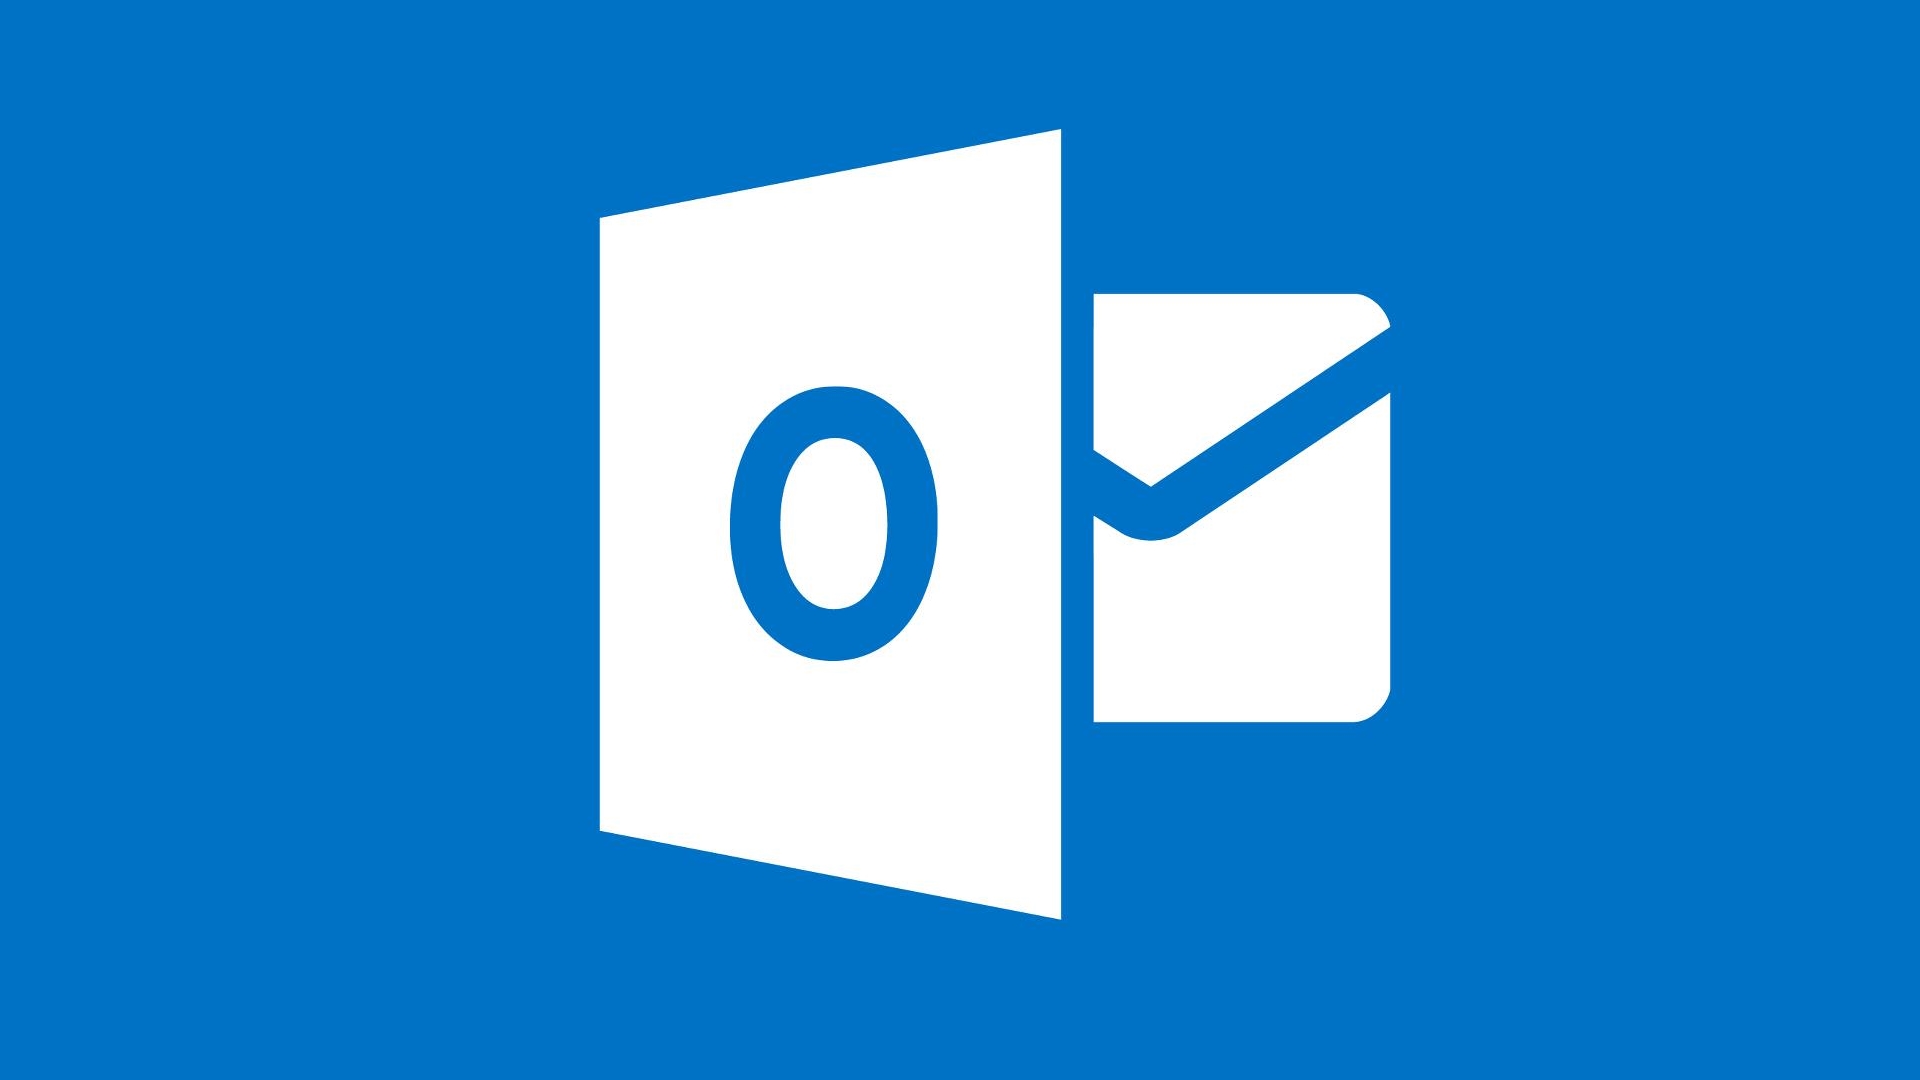 Microsoft launched outlook email